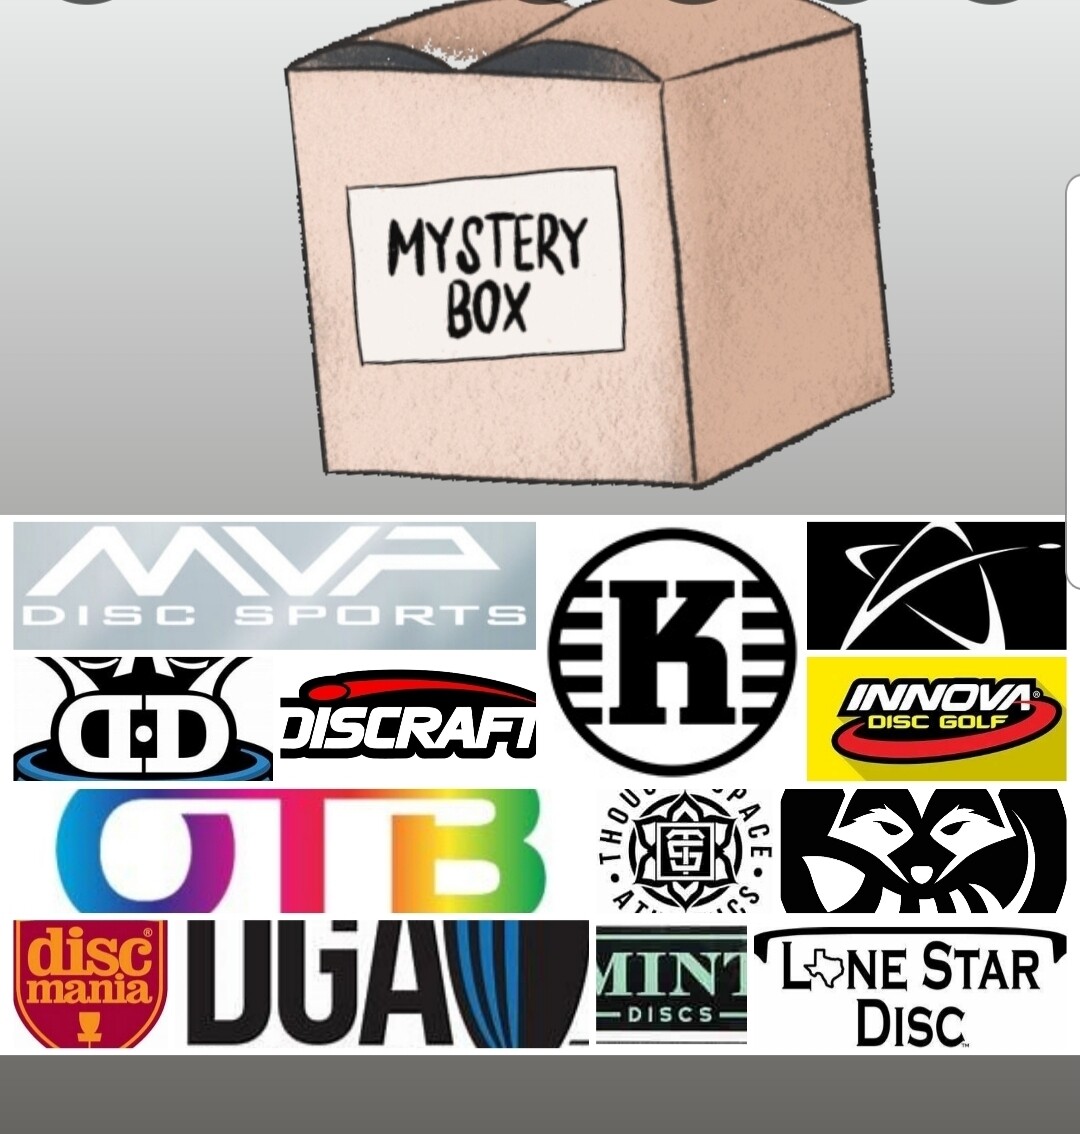 All Manufacturers Mystery Box or Pick and Choose manufacturers. Choose 1,2,3,5,7 OR 10 Disc Pack. Starting at $18.99 and up to 169.99